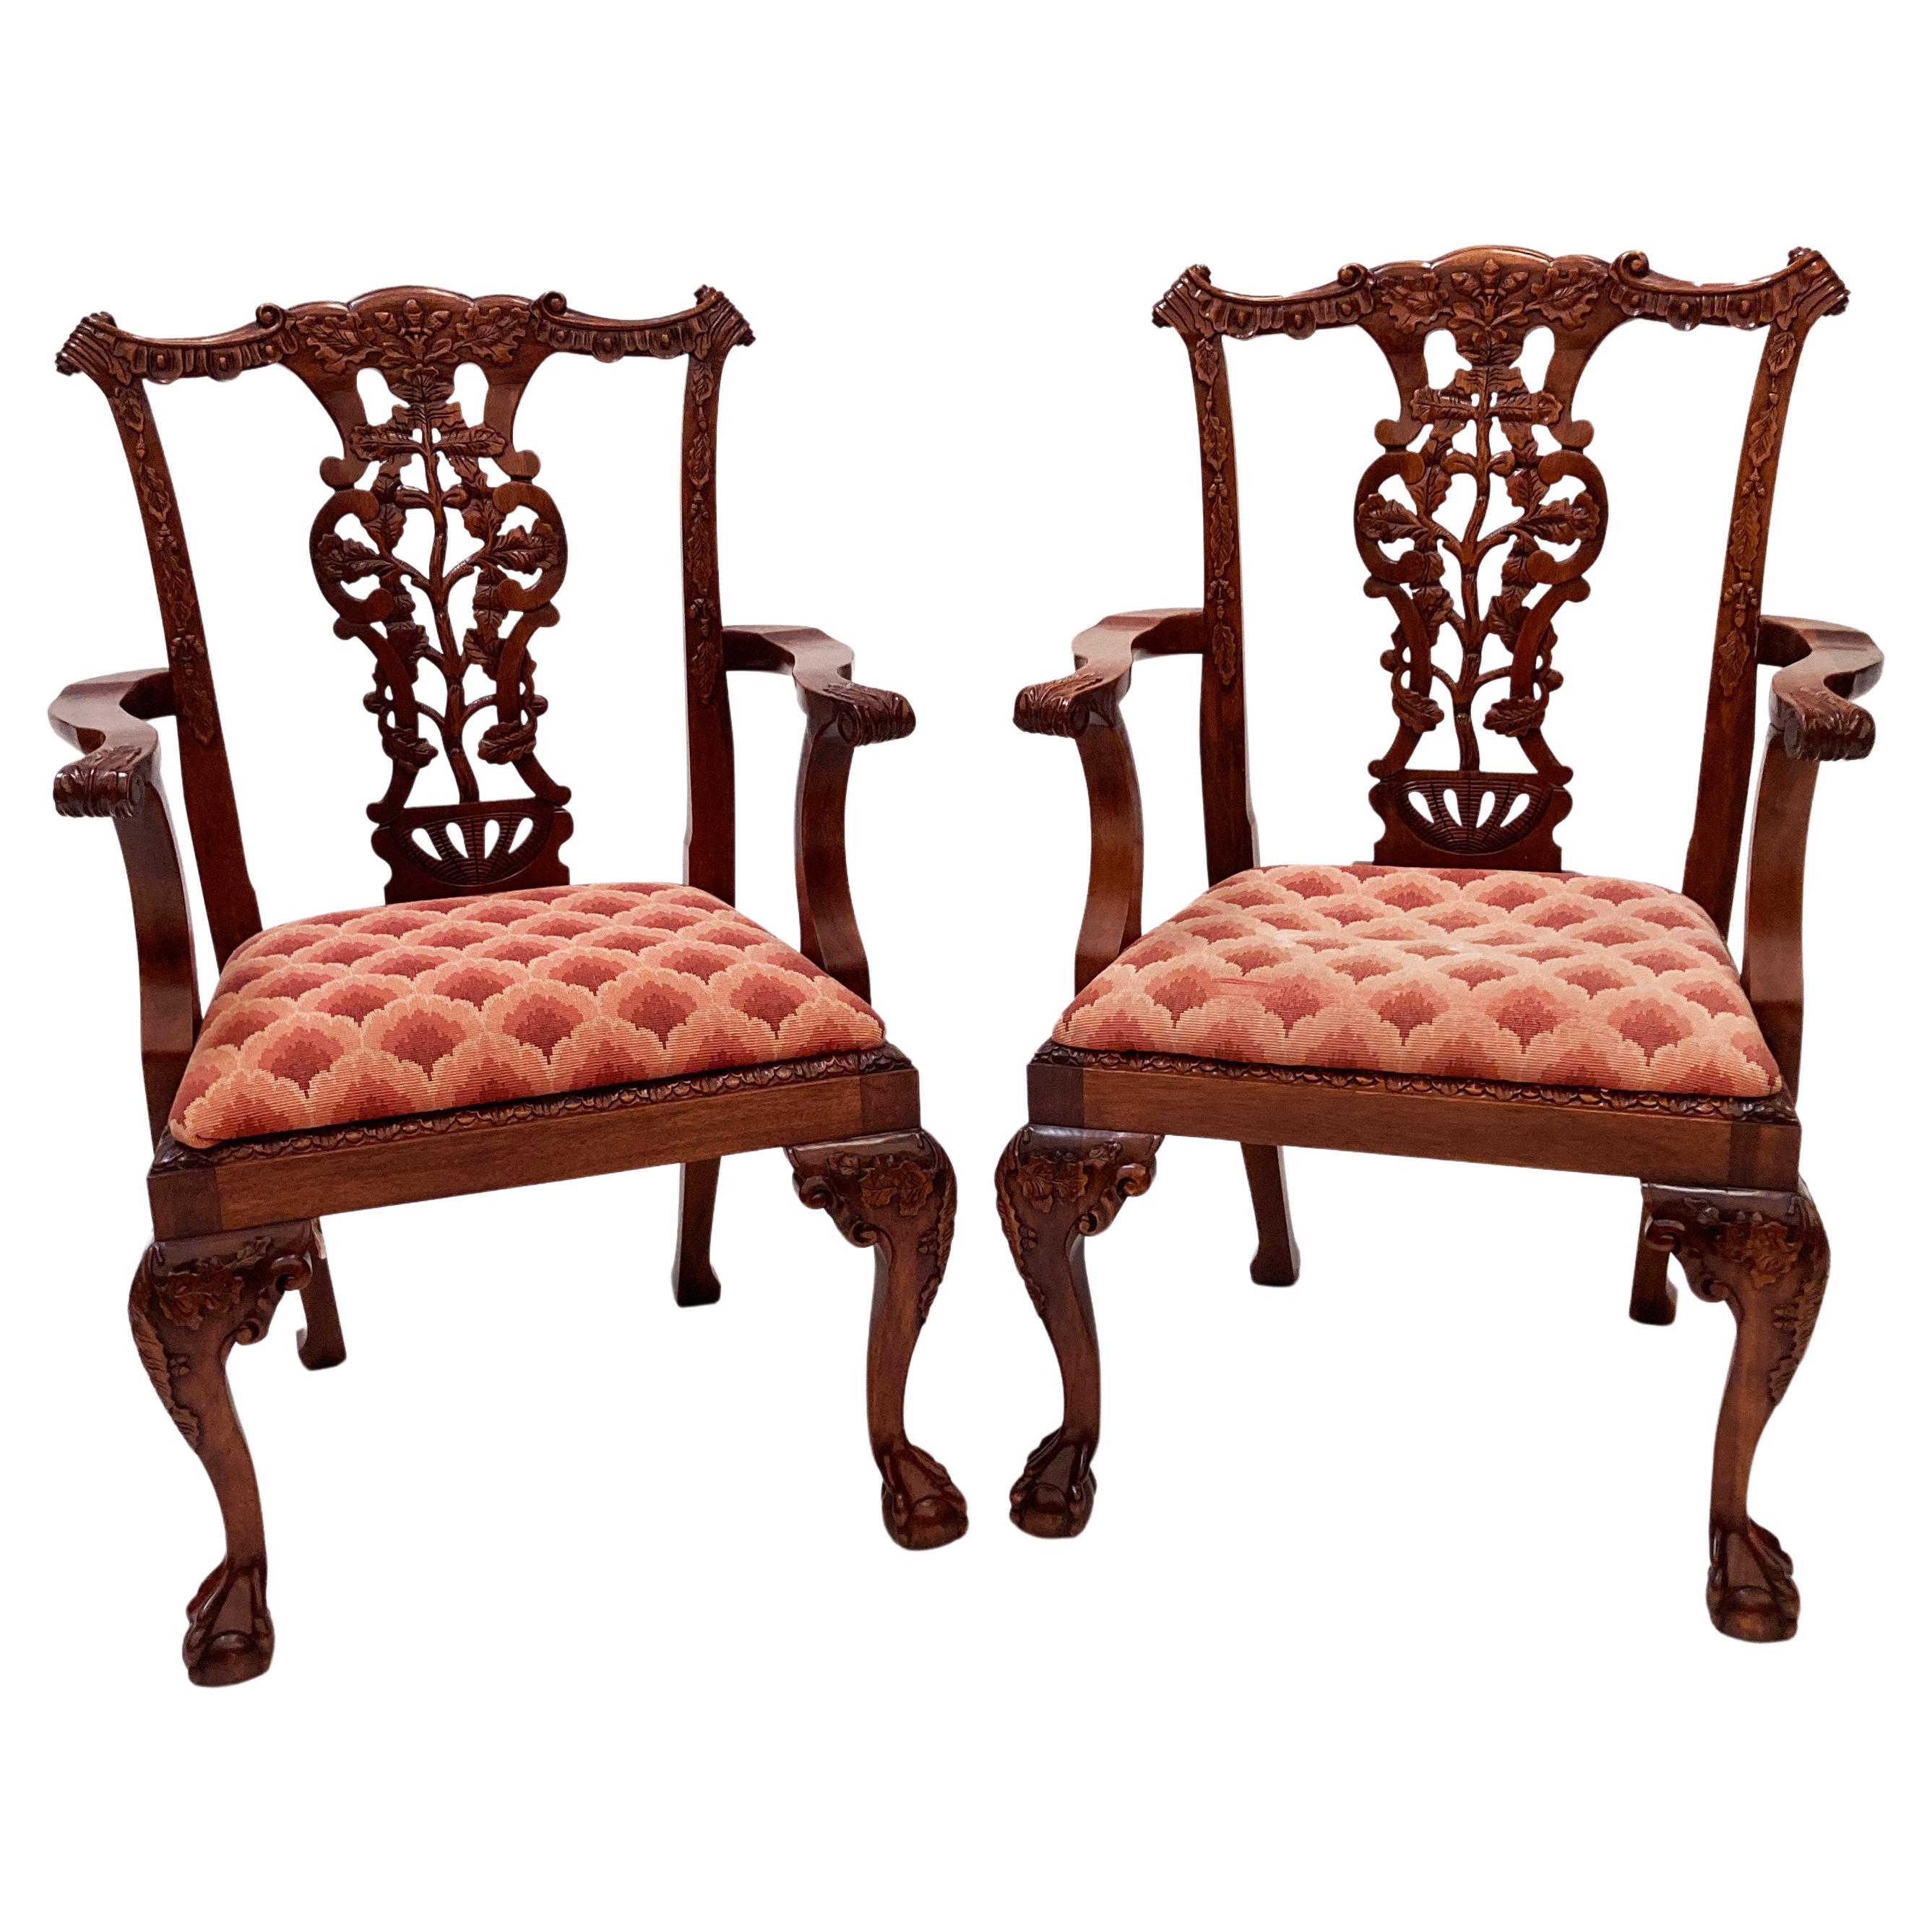 Mid 19th Century Pair of Early English Mahogany Chippendale Open Arm Chairs For Sale